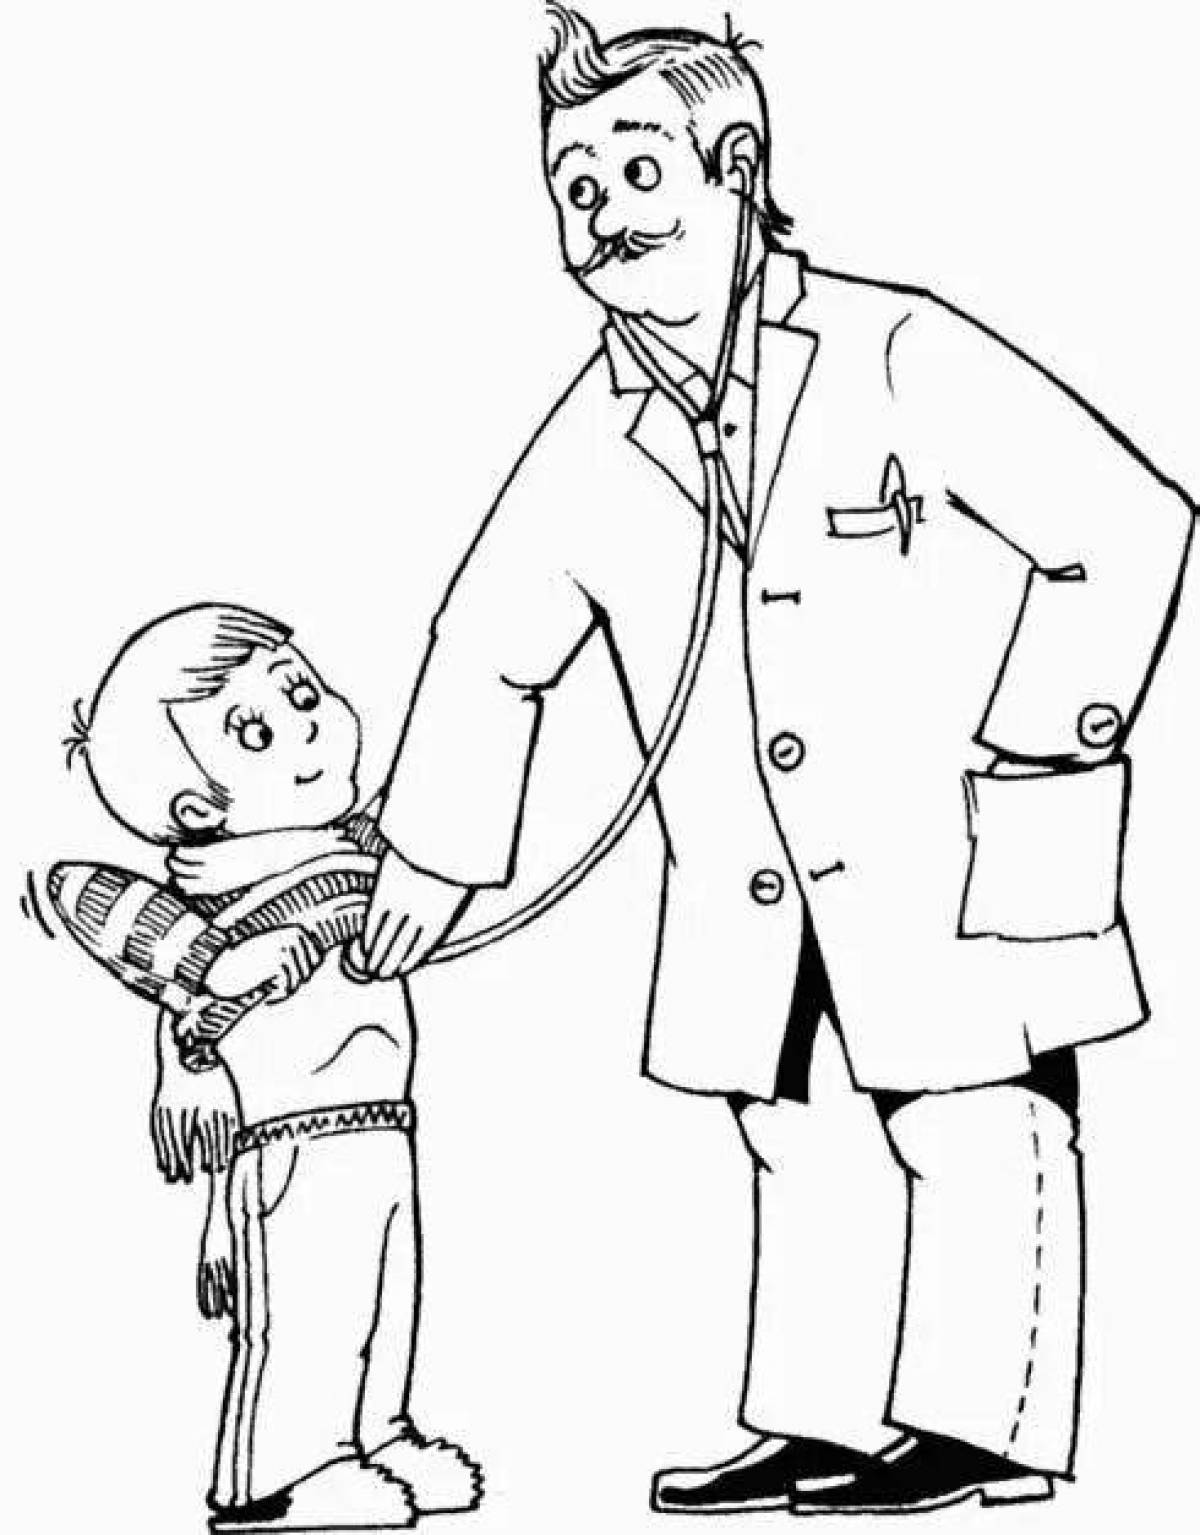 Colorful doctor coloring page for kids